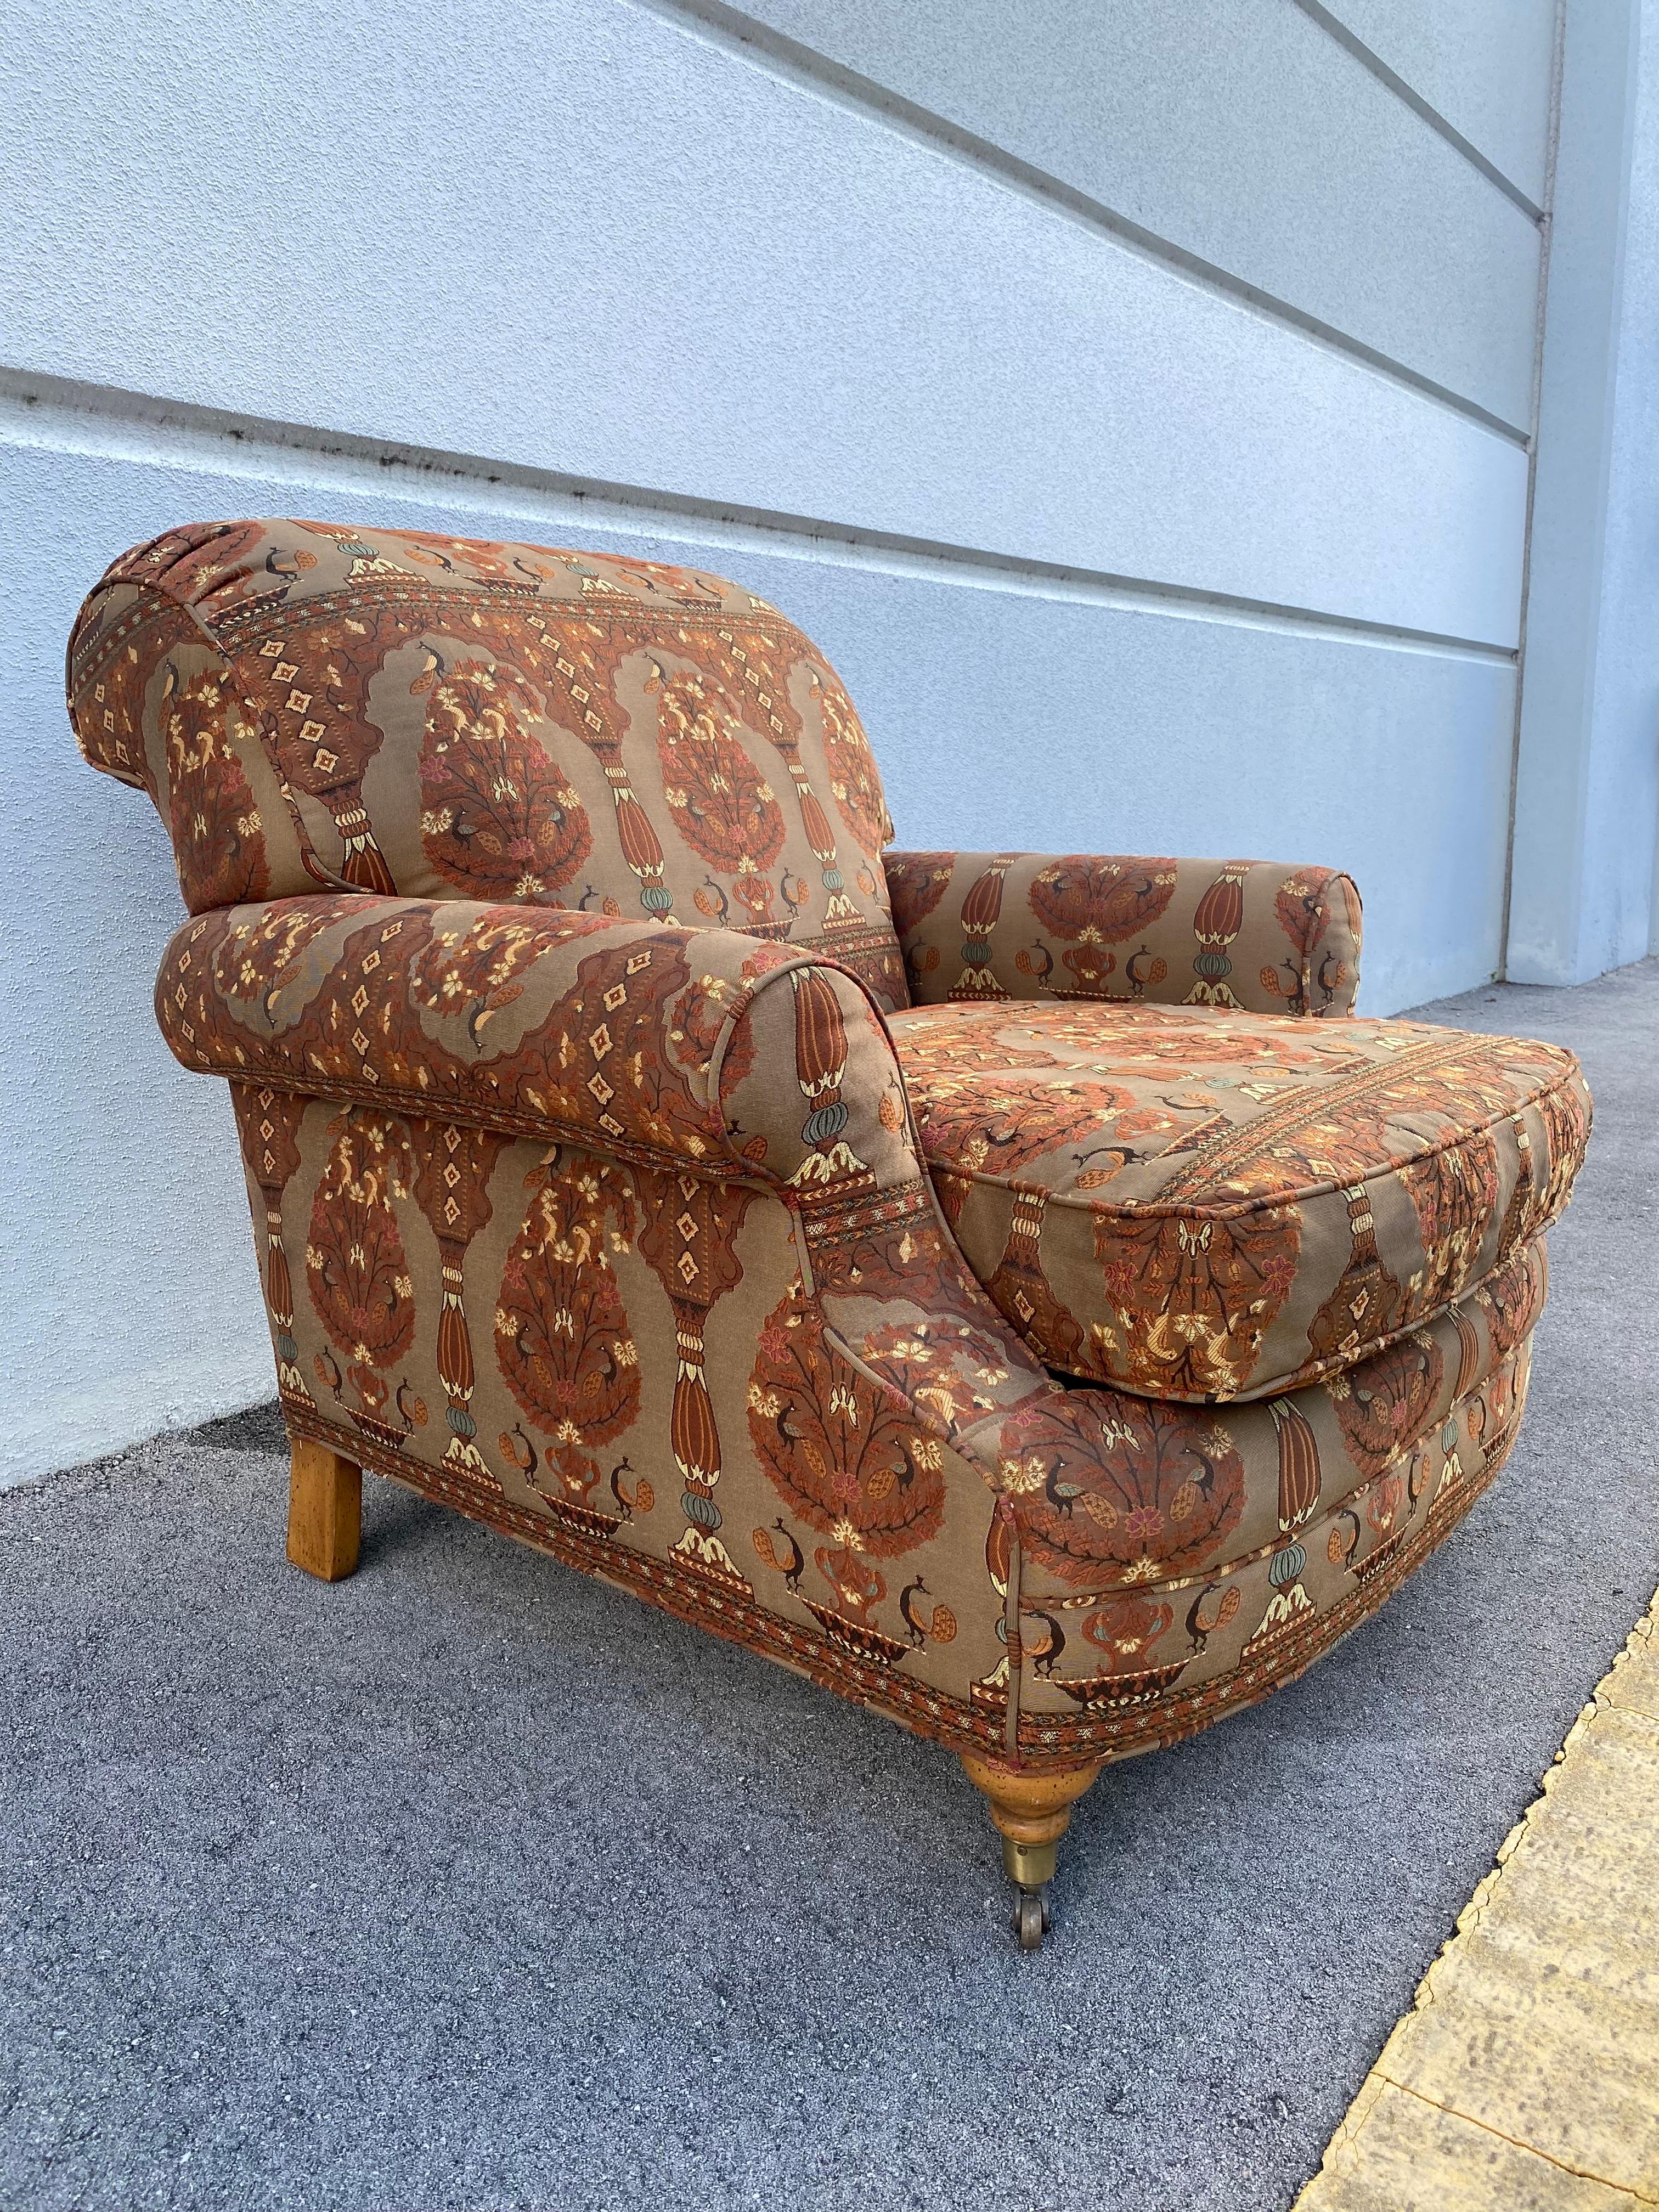 The beautiful rare collection is statement piece which is also extremely comfortable and packed with personality! We are delighted to offer for sale this absolutely stunning, signature art textile armchair with matching run up large ottoman. Just